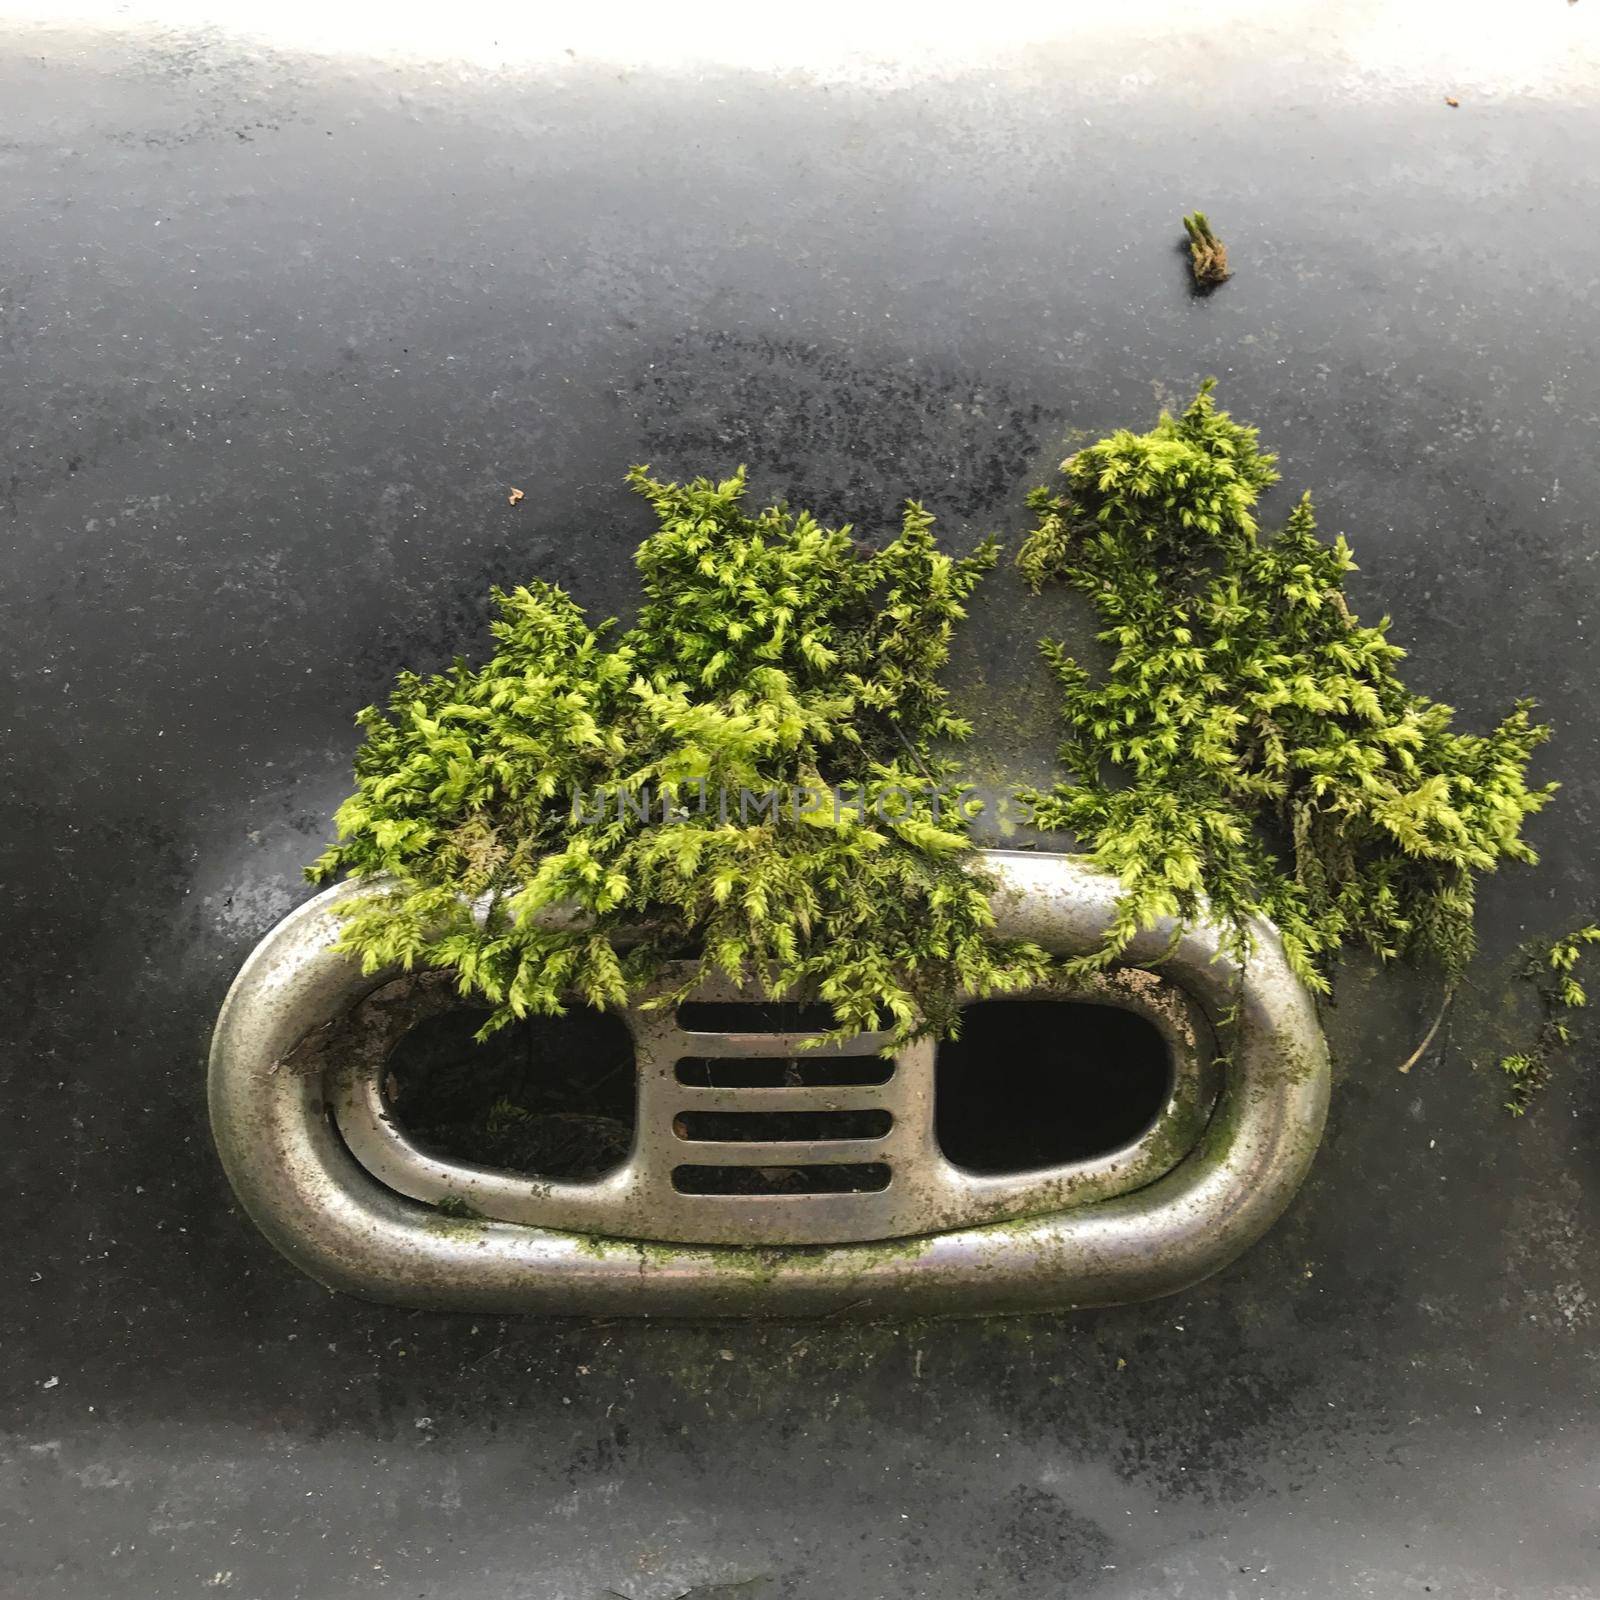 Green Moss growing on the hood of an black oldtimer